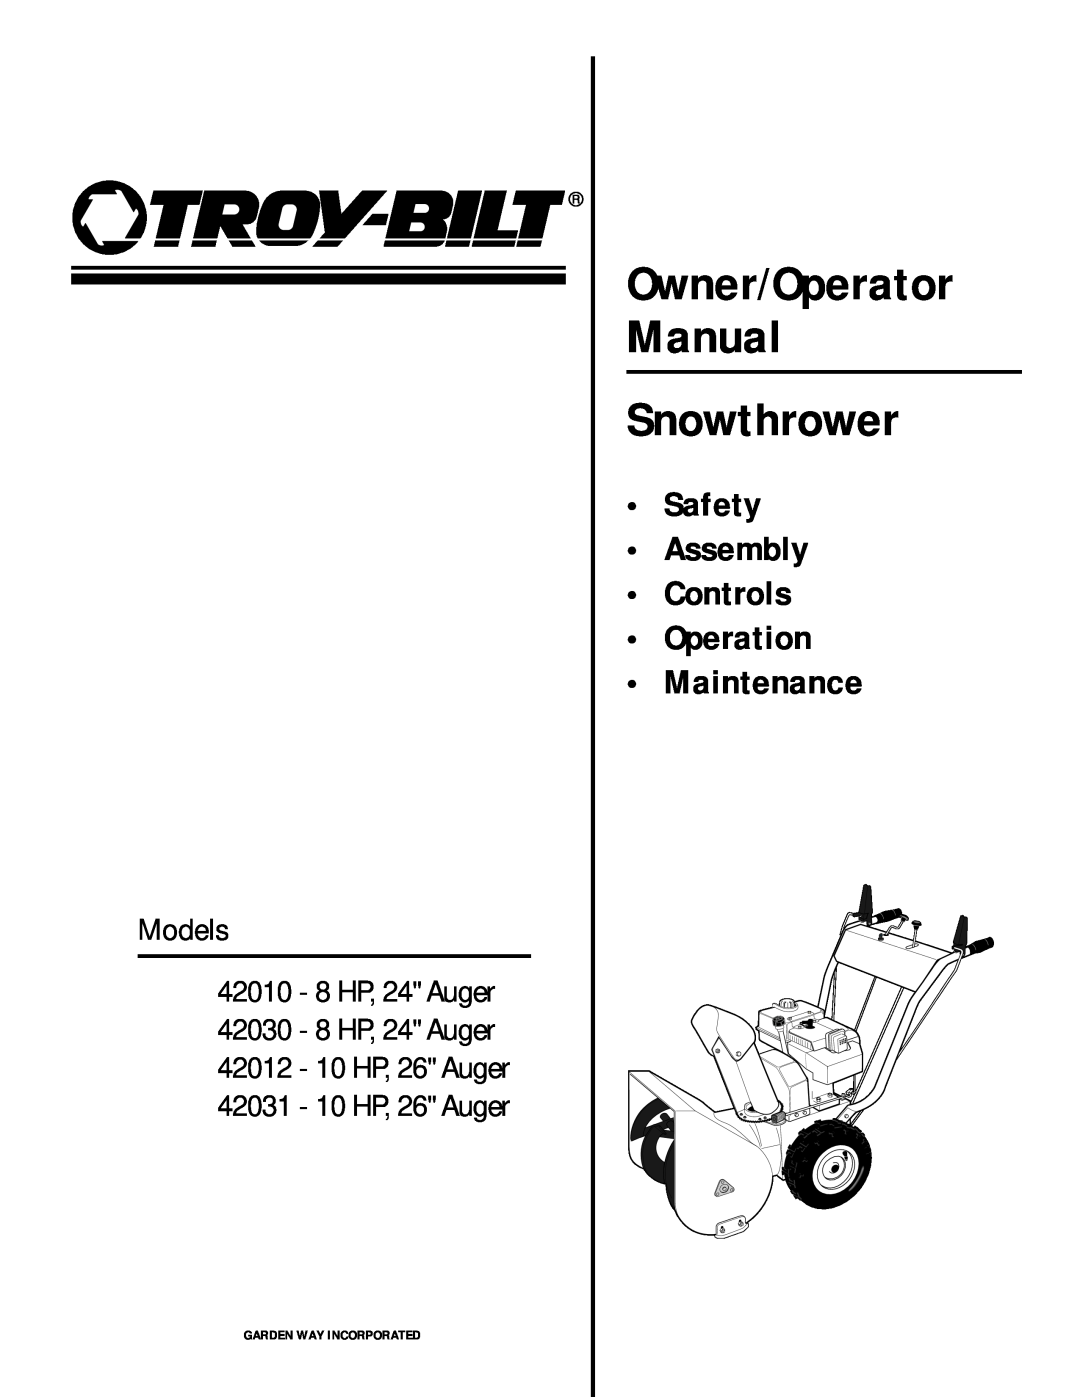 Troy-Bilt 42012, 42031, 42010 manual Snowthrower, Owner/Operator Manual, Safety Assembly Controls Operation Maintenance 